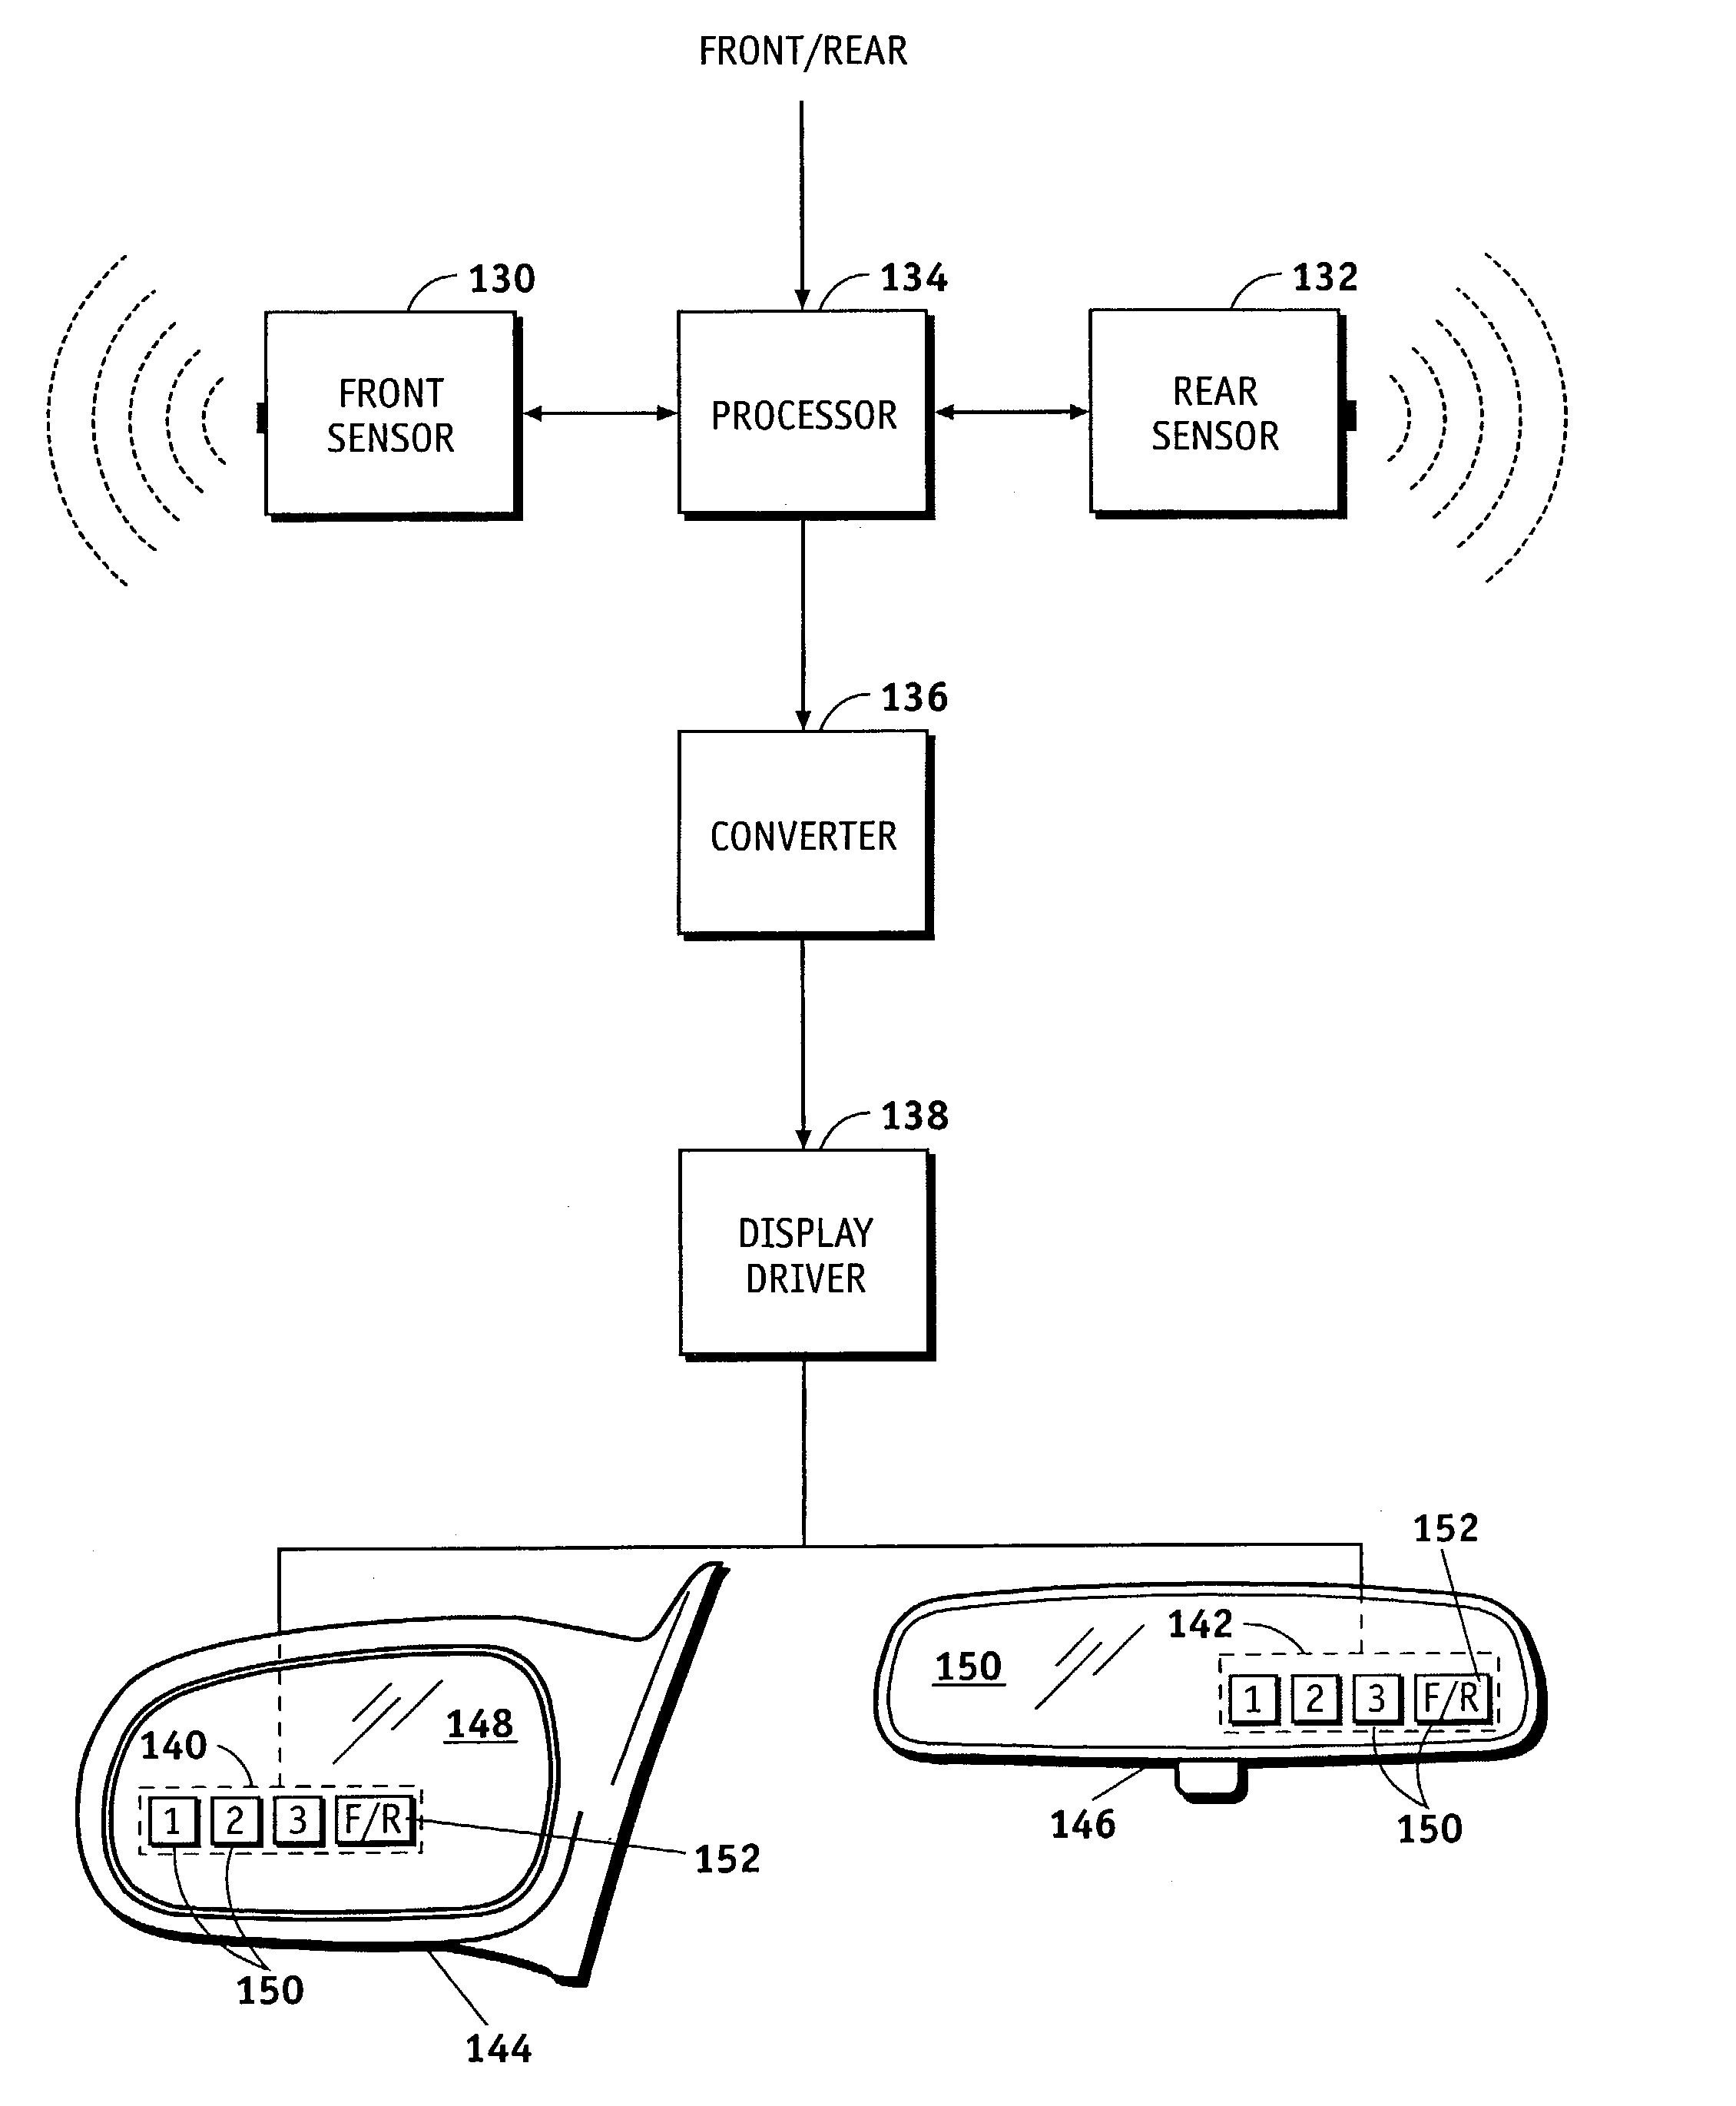 Distance detection and display system for use in a vehicle